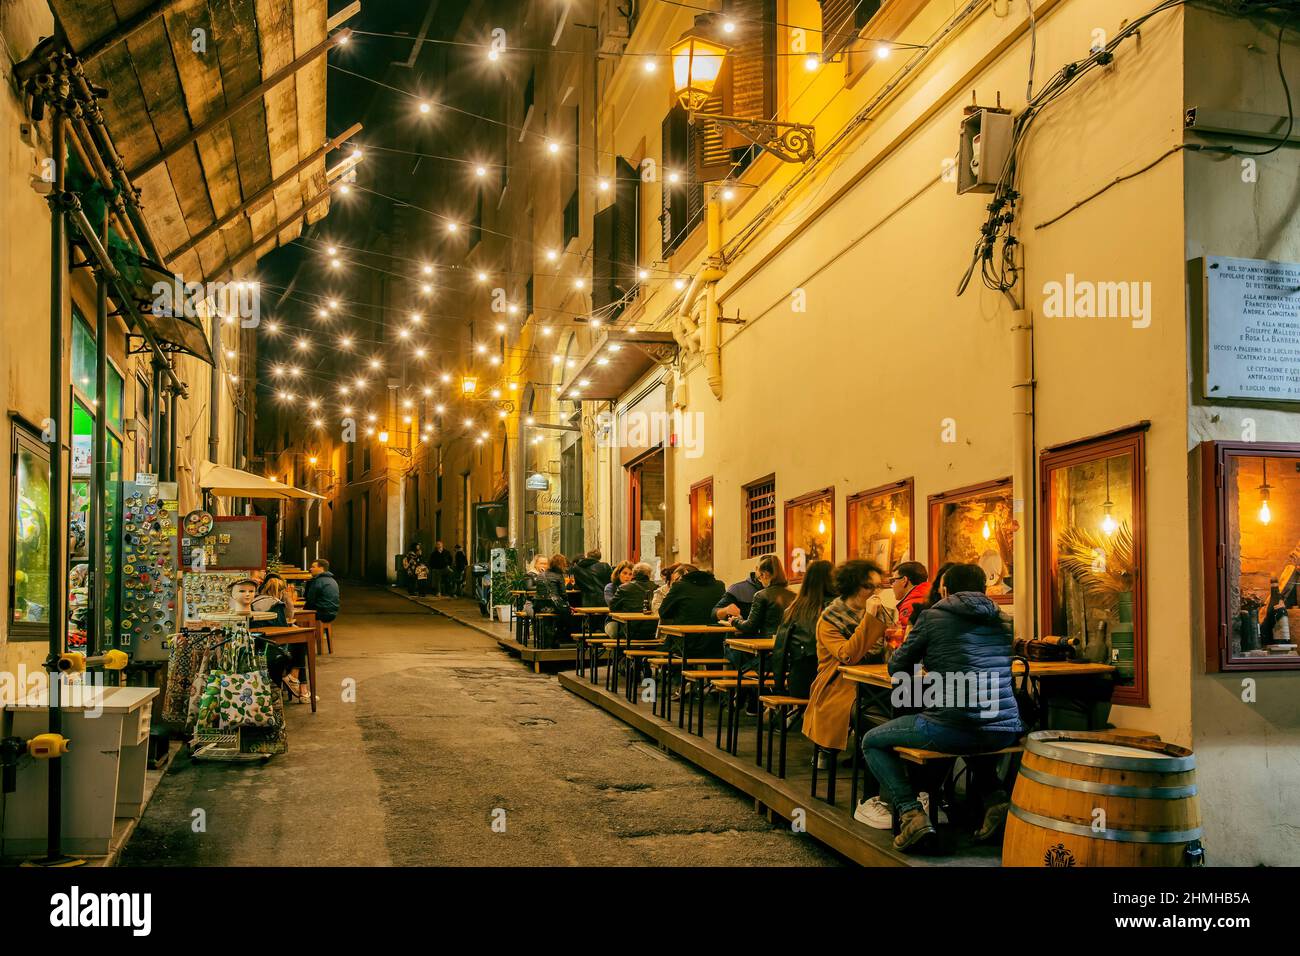 Street restaurant in the old town at night, Palermo, Sicily, Italy Stock Photo